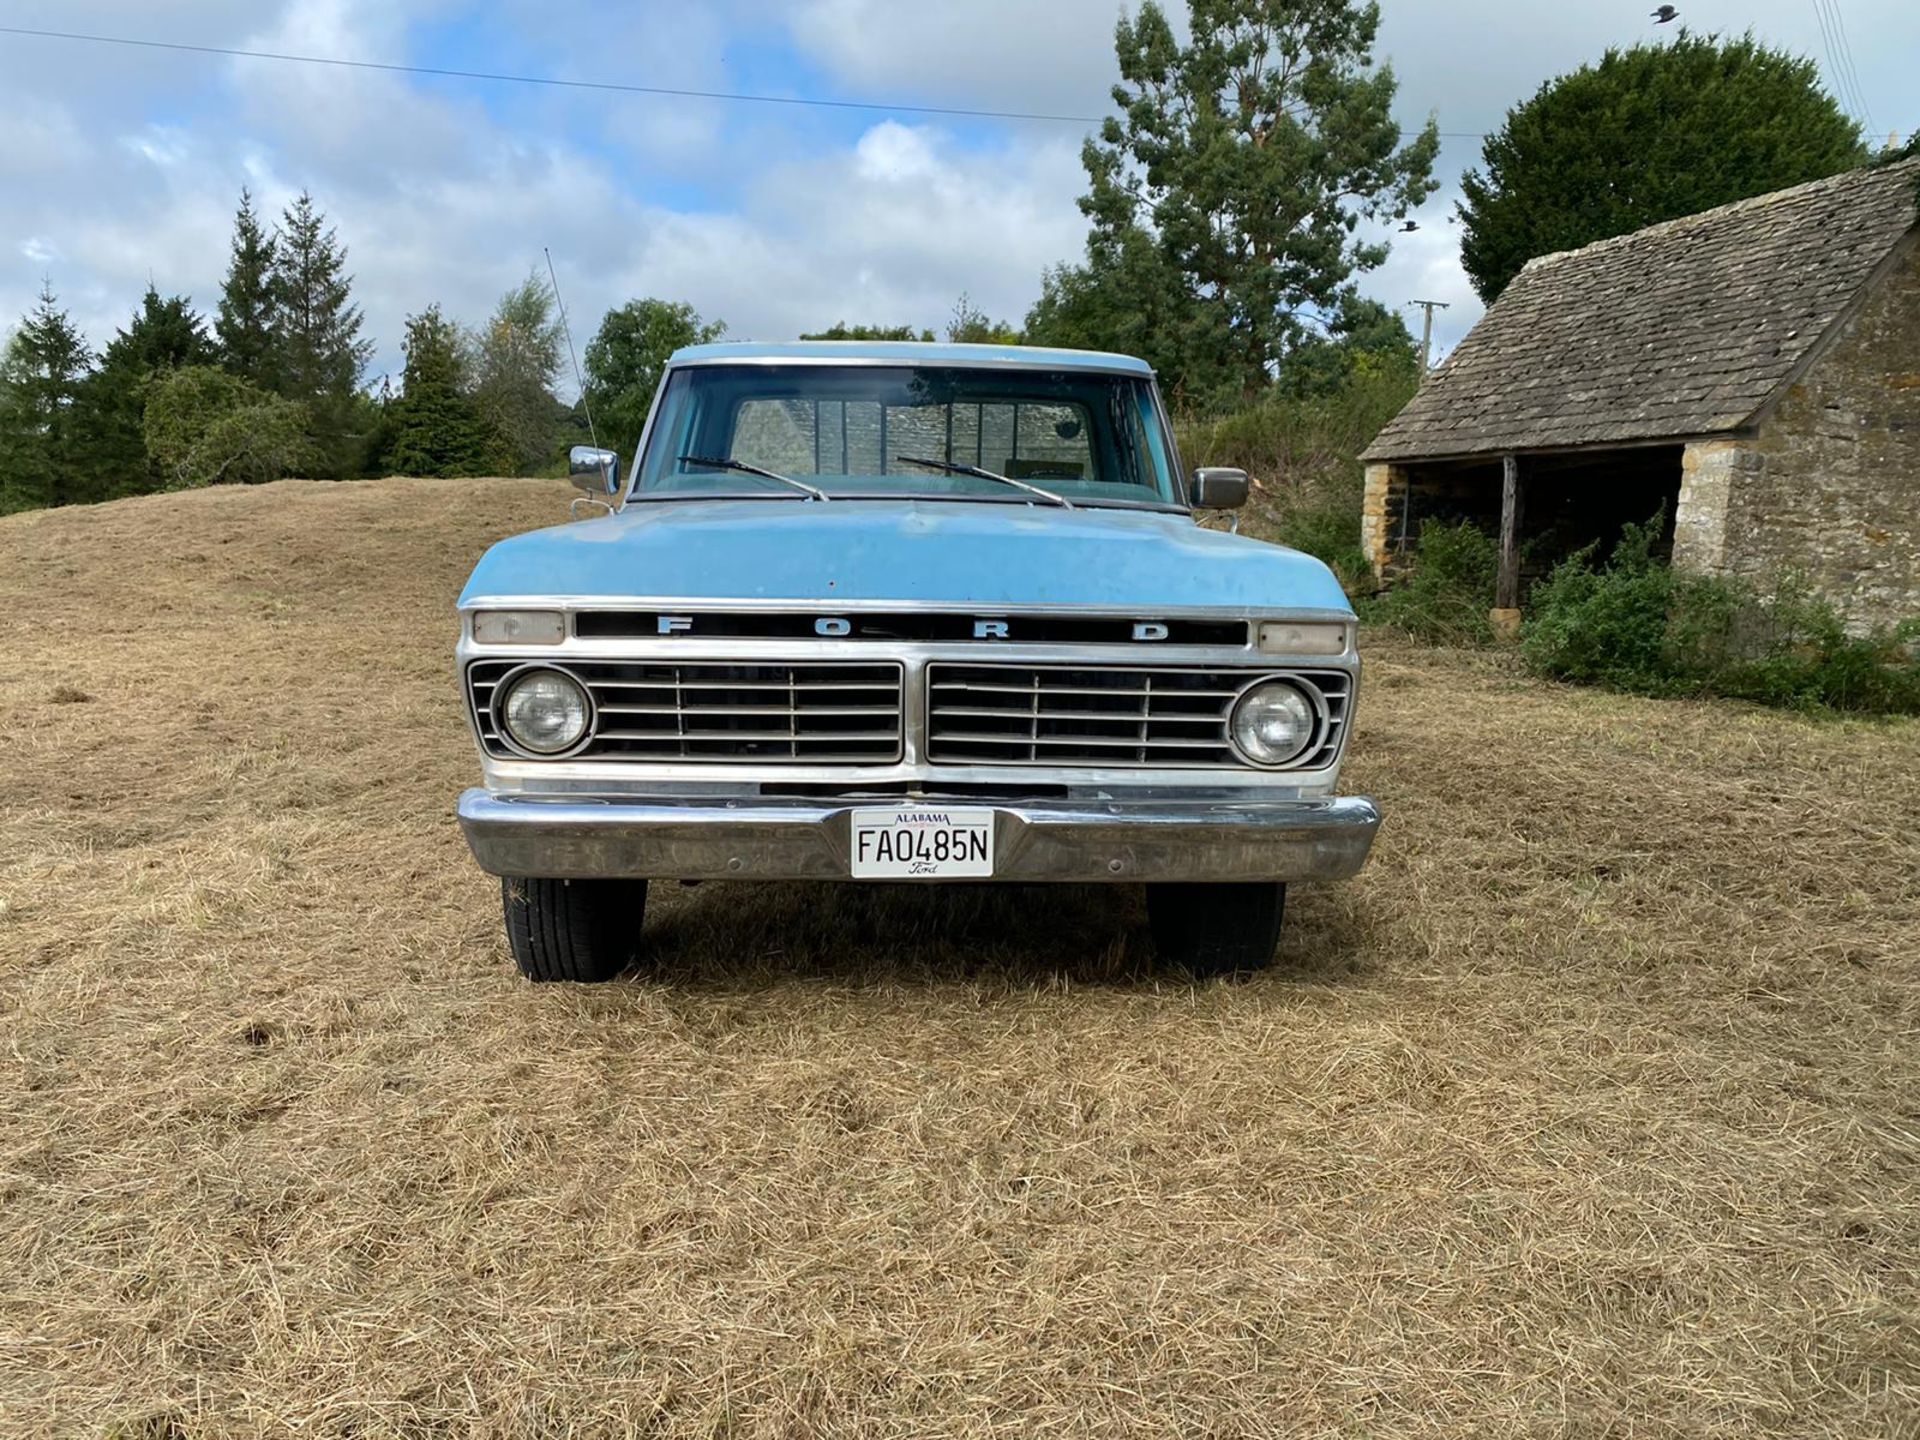 1975 FORD F-250 6.4 (390) V8, 4 SPEED MANUAL, HAS JUST BEEN REGISTERED, NEW BENCH SEAT *NO VAT* - Image 6 of 22